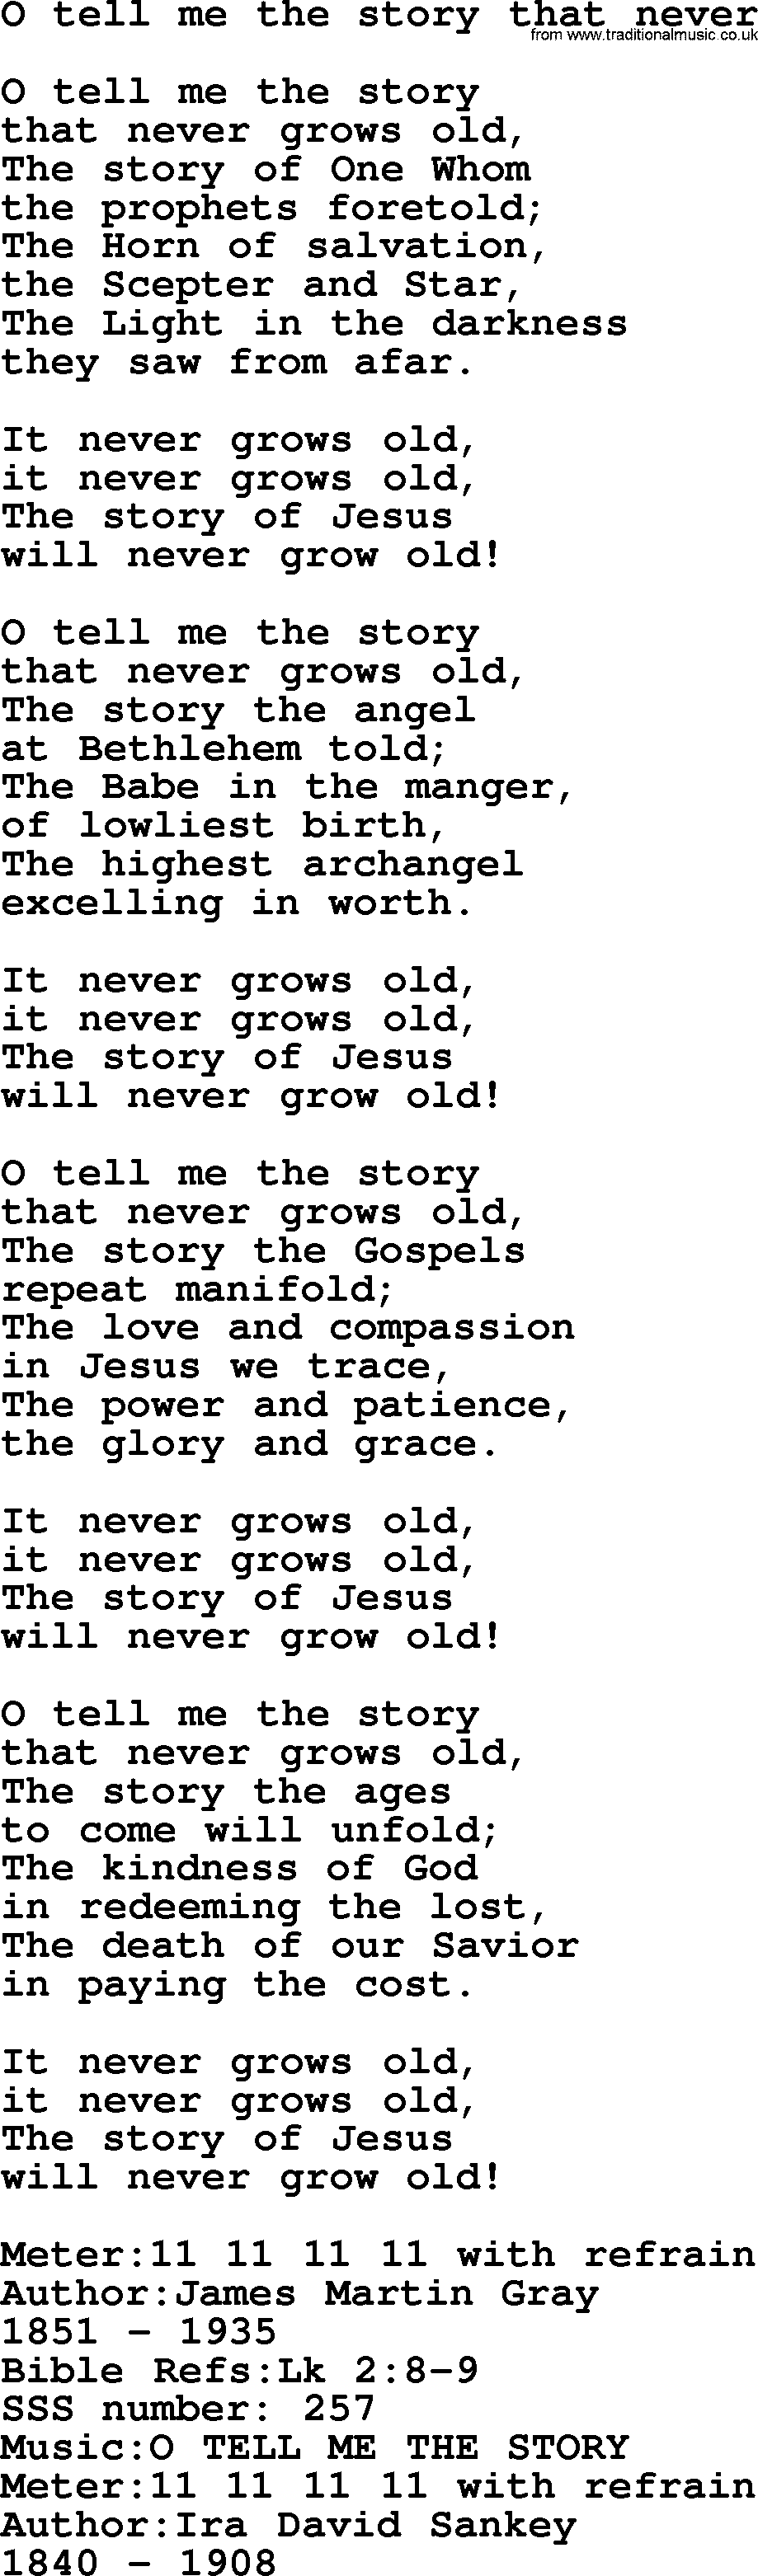 Sacred Songs and Solos complete, 1200 Hymns, title: O Tell Me The Story That Never, lyrics and PDF